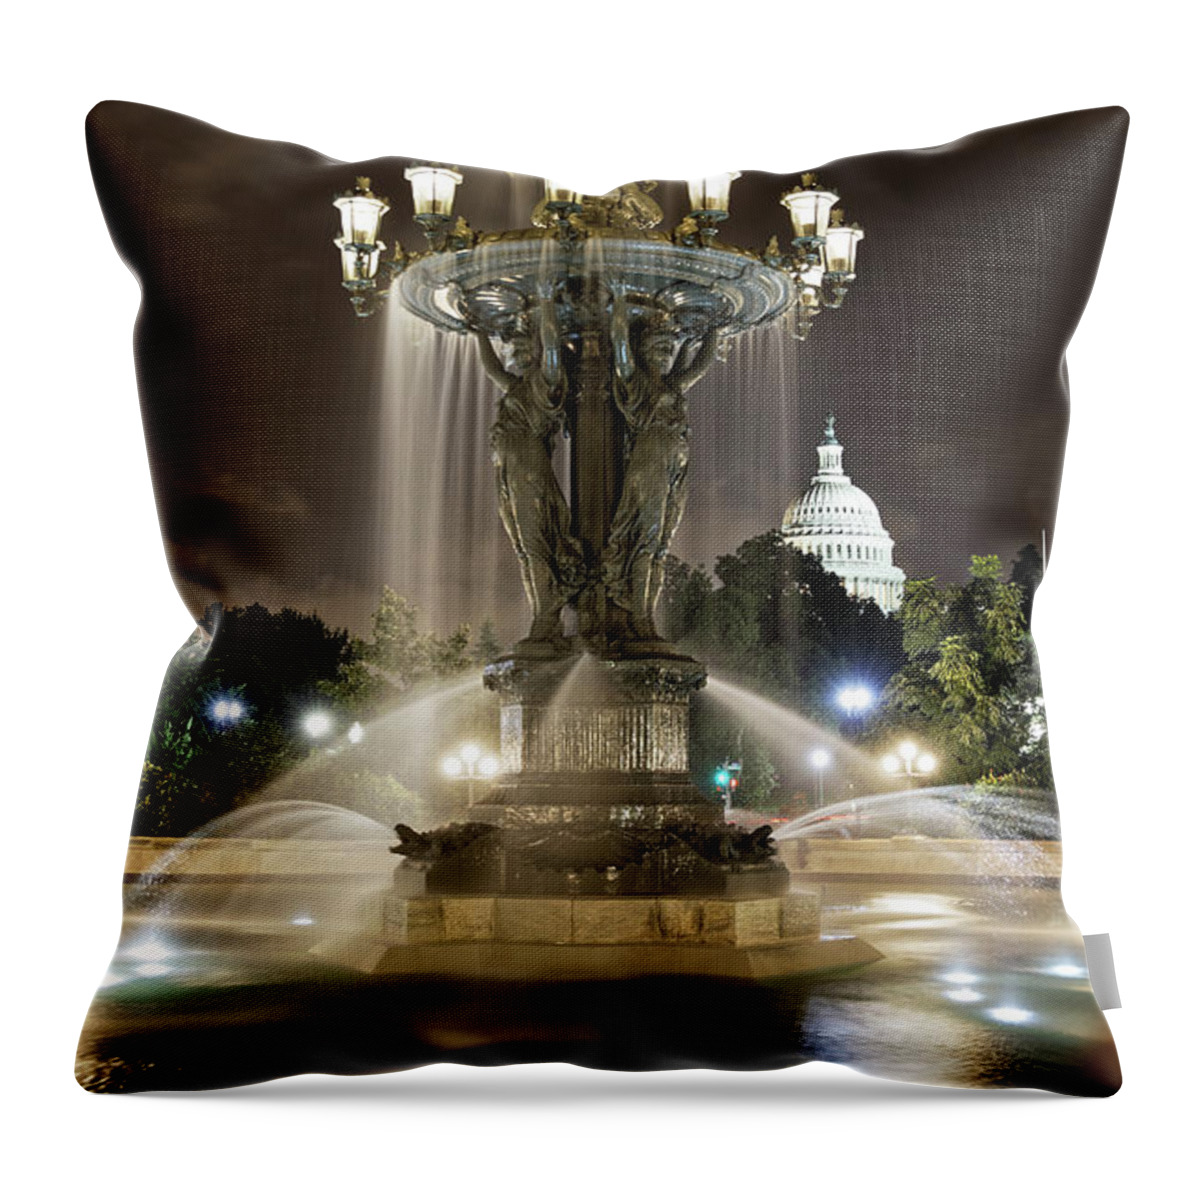 Bartholdi Fountain Throw Pillow featuring the photograph Bartholdi Fountain 2 by Doolittle Photography and Art